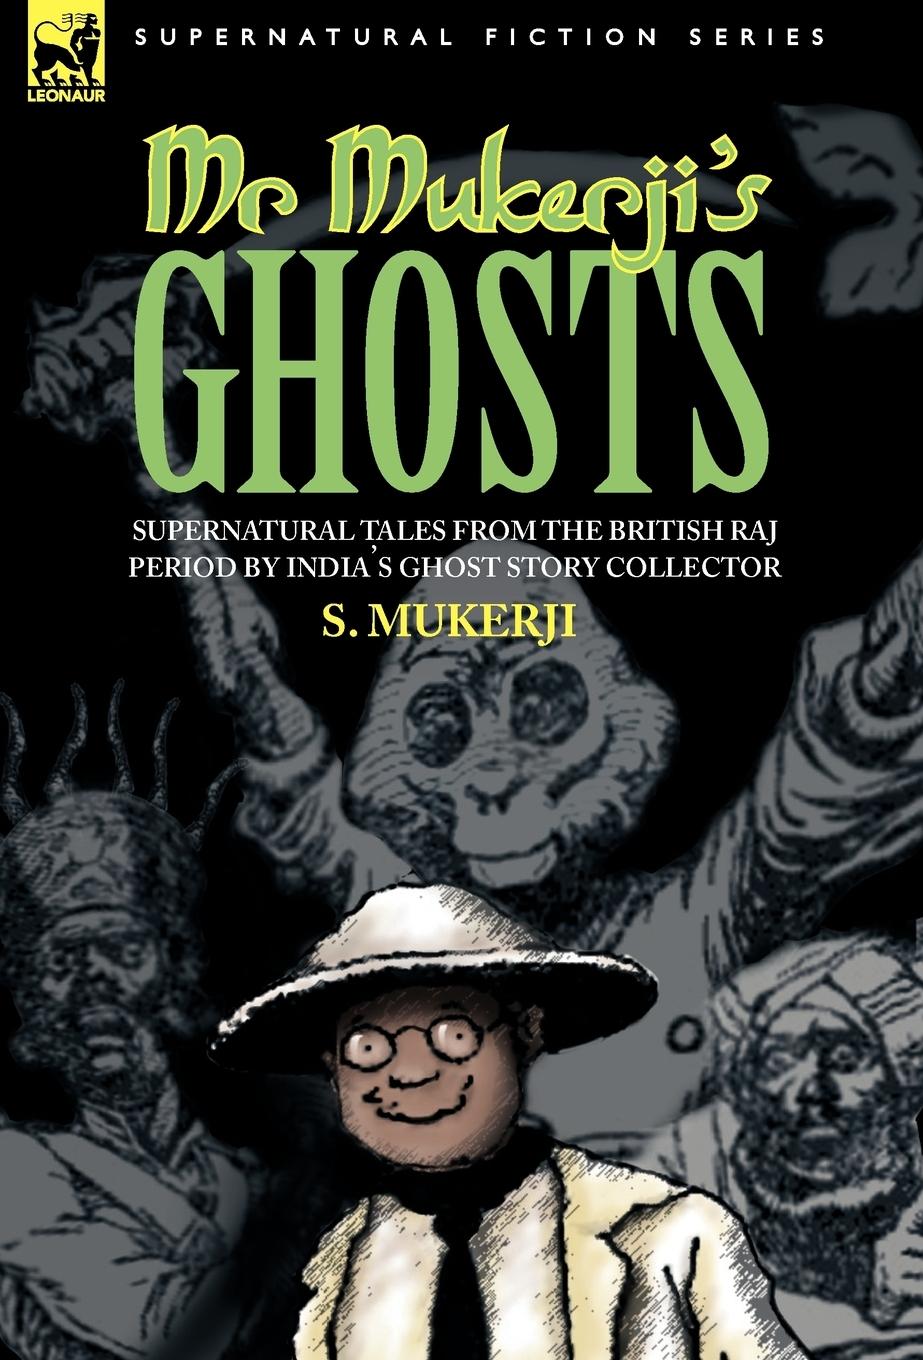 MR. MUKERJI'S GHOSTS - SUPERNATURAL TALES FROM THE BRITISH RAJ PERIOD BY INDIA'S GHOST STORY COLLECTOR - Mukerji, S.